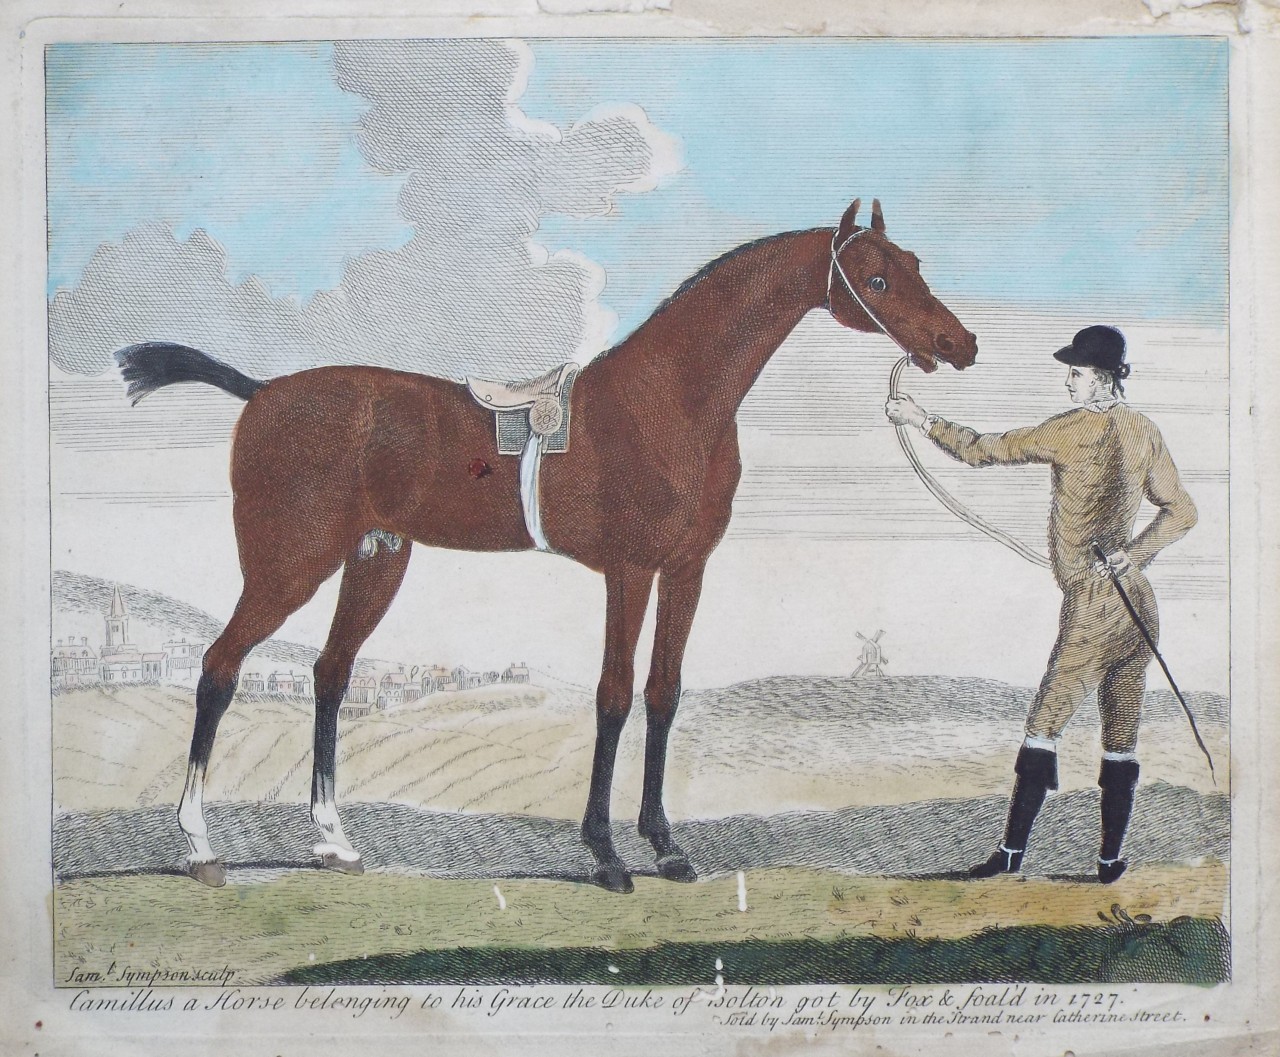 Print - Camillus a horse belonging to His Grace the Duke of Bolton got by Fox & Fol'd in 1727  - Sympson